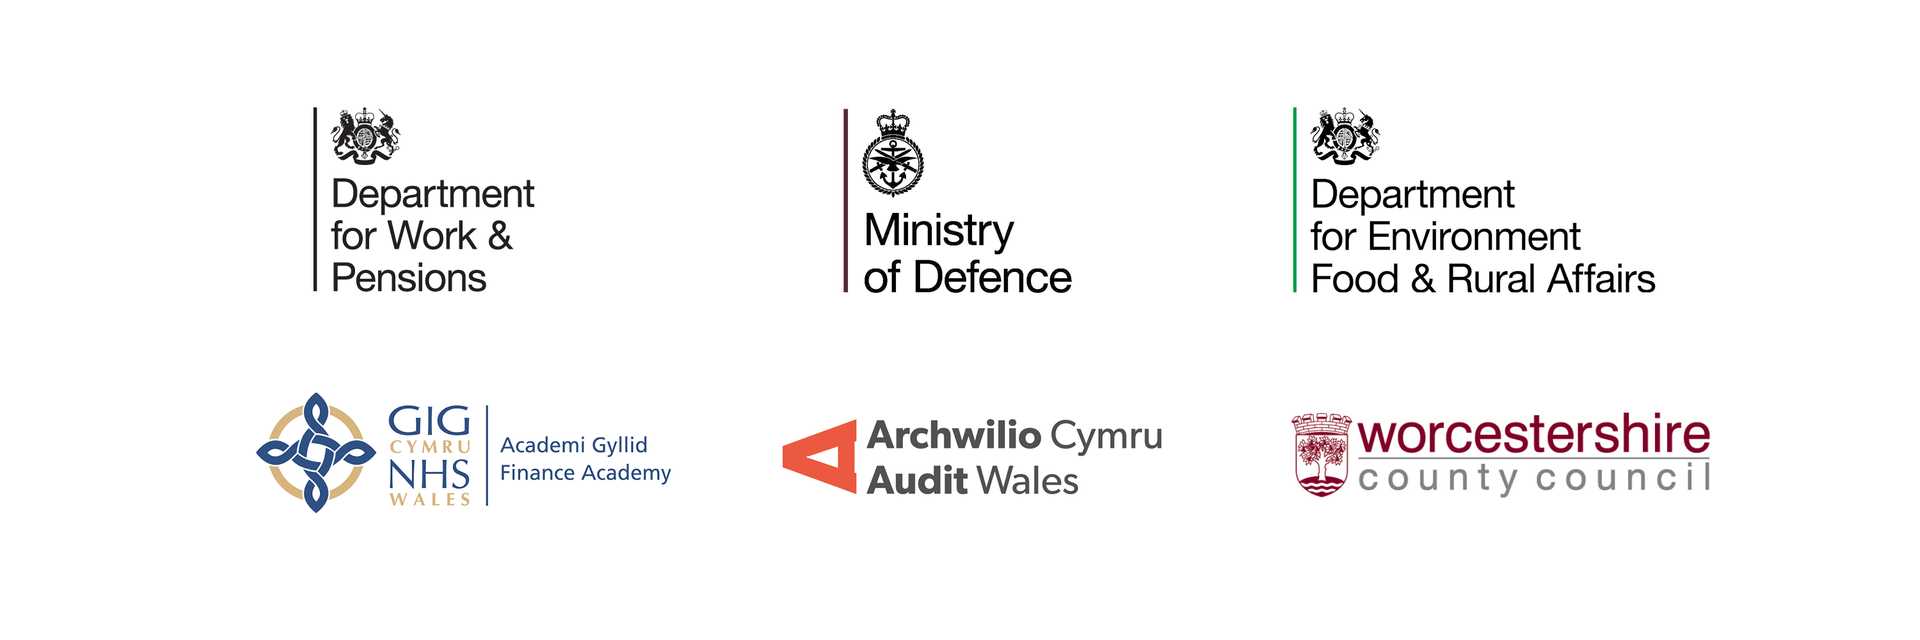 Logos for Department for Work and Pensions (DWP), Ministry of Defence (MOD), Department for Environment, Food and Rural Affairs (Defra), NHS Wales, Audit Wales, Worcestershire County Council